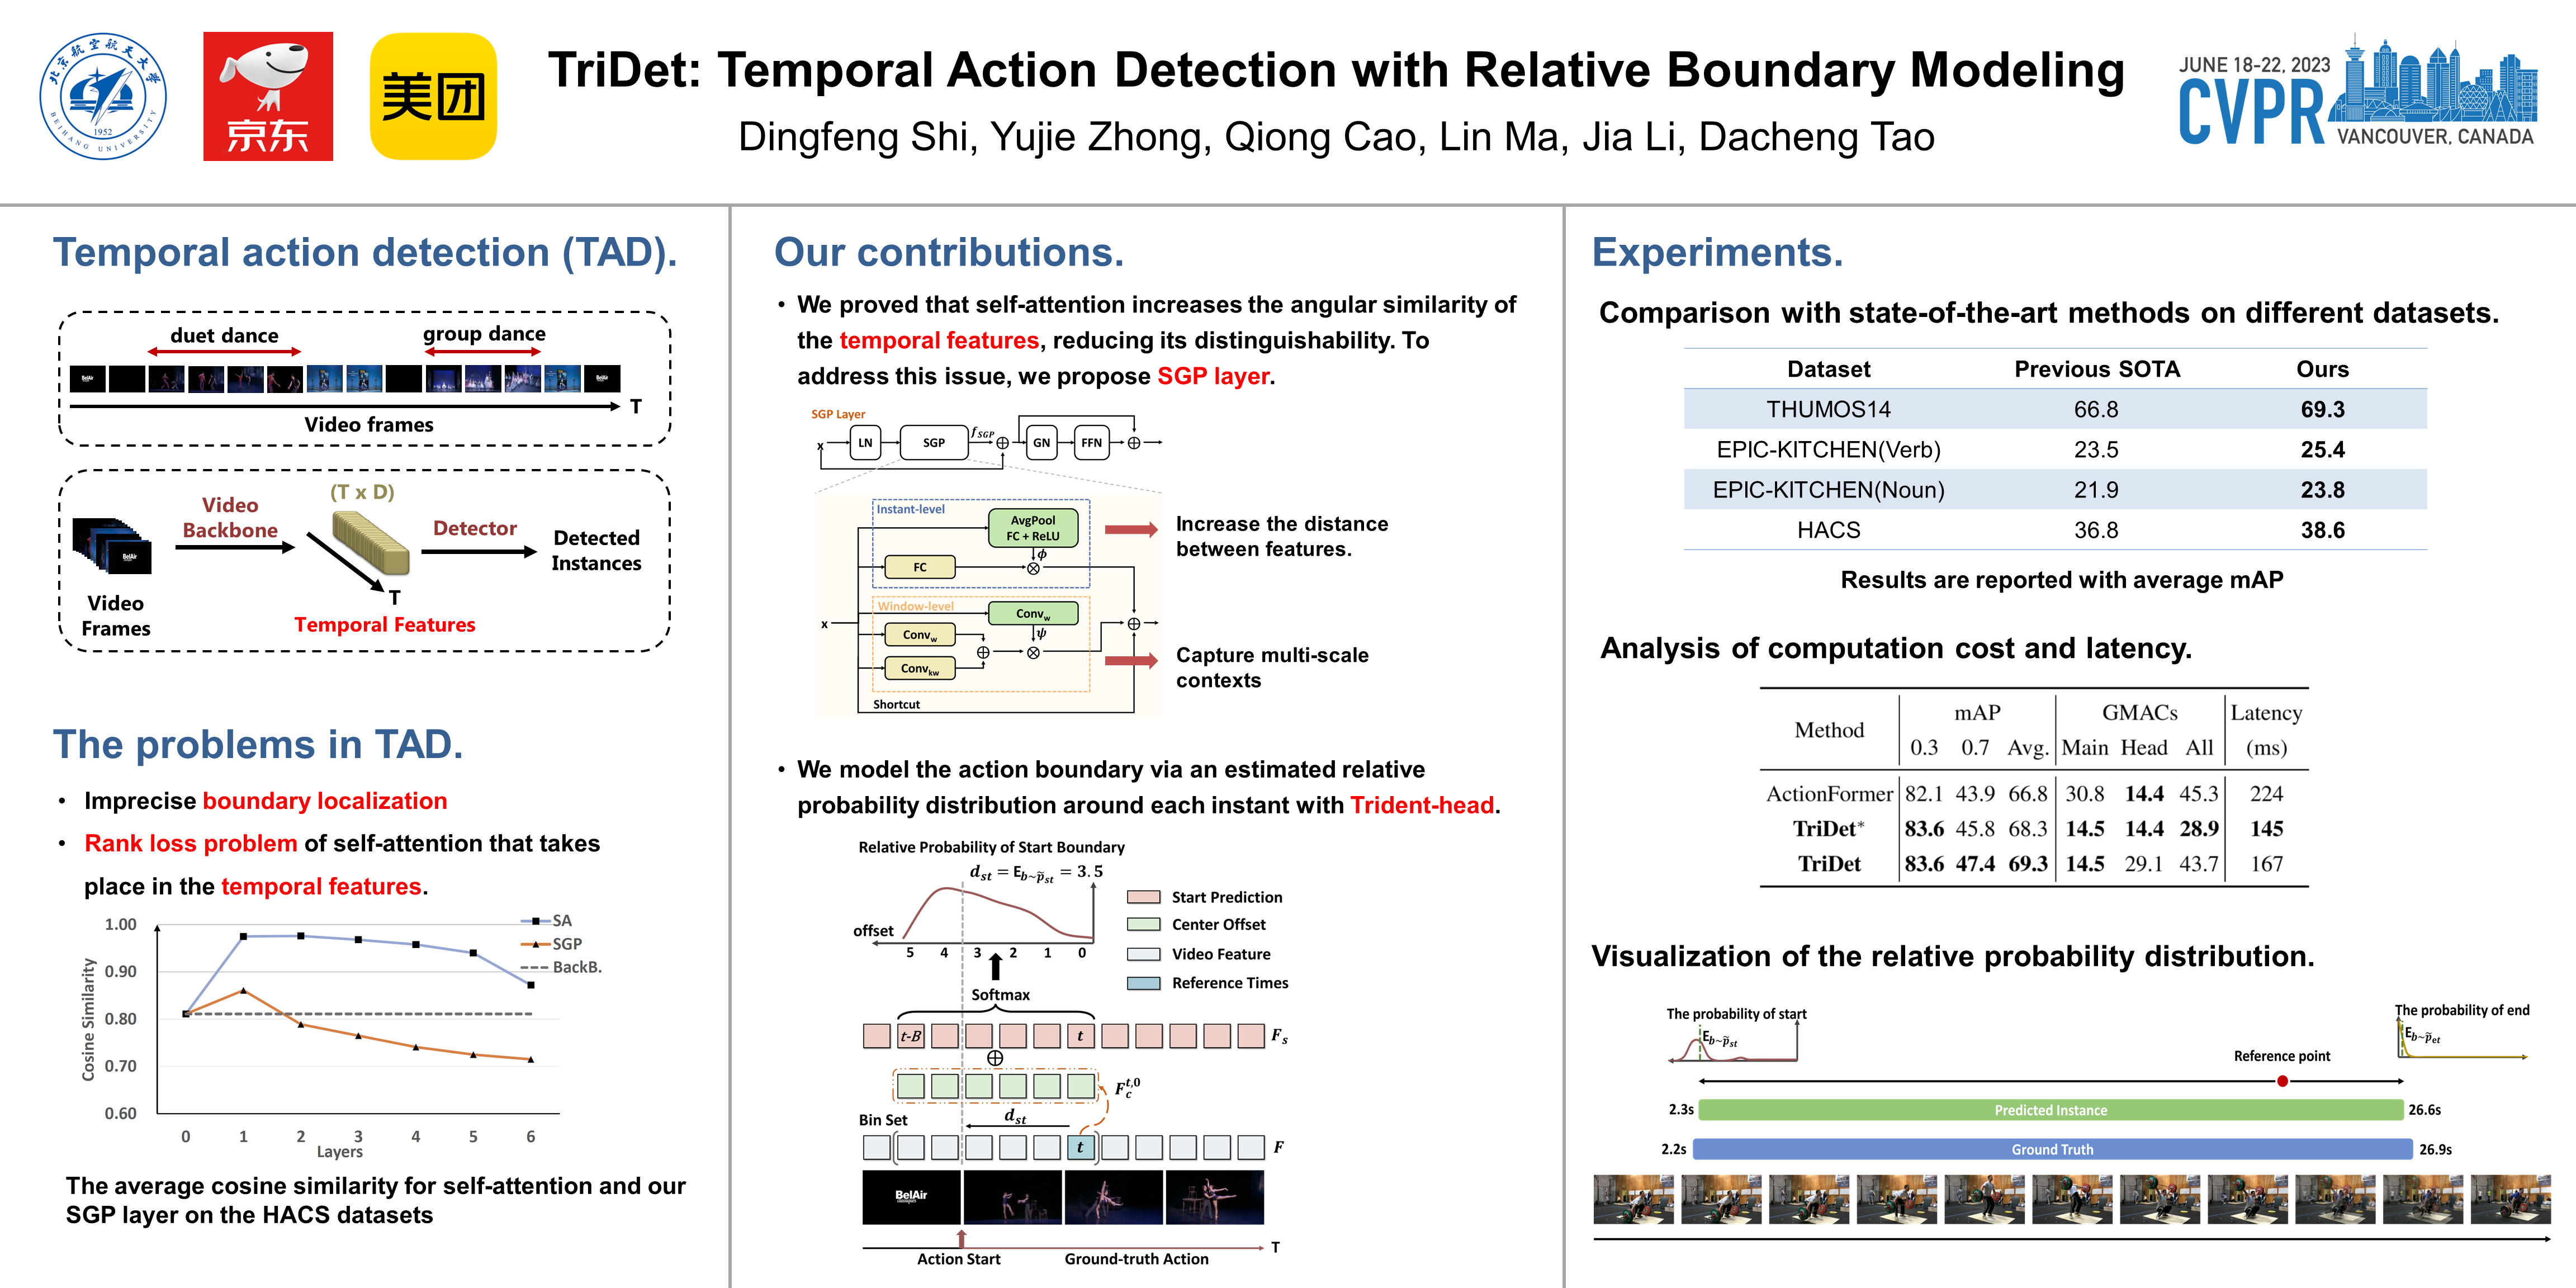 CVPR Poster TriDet Temporal Action Detection With Relative Boundary